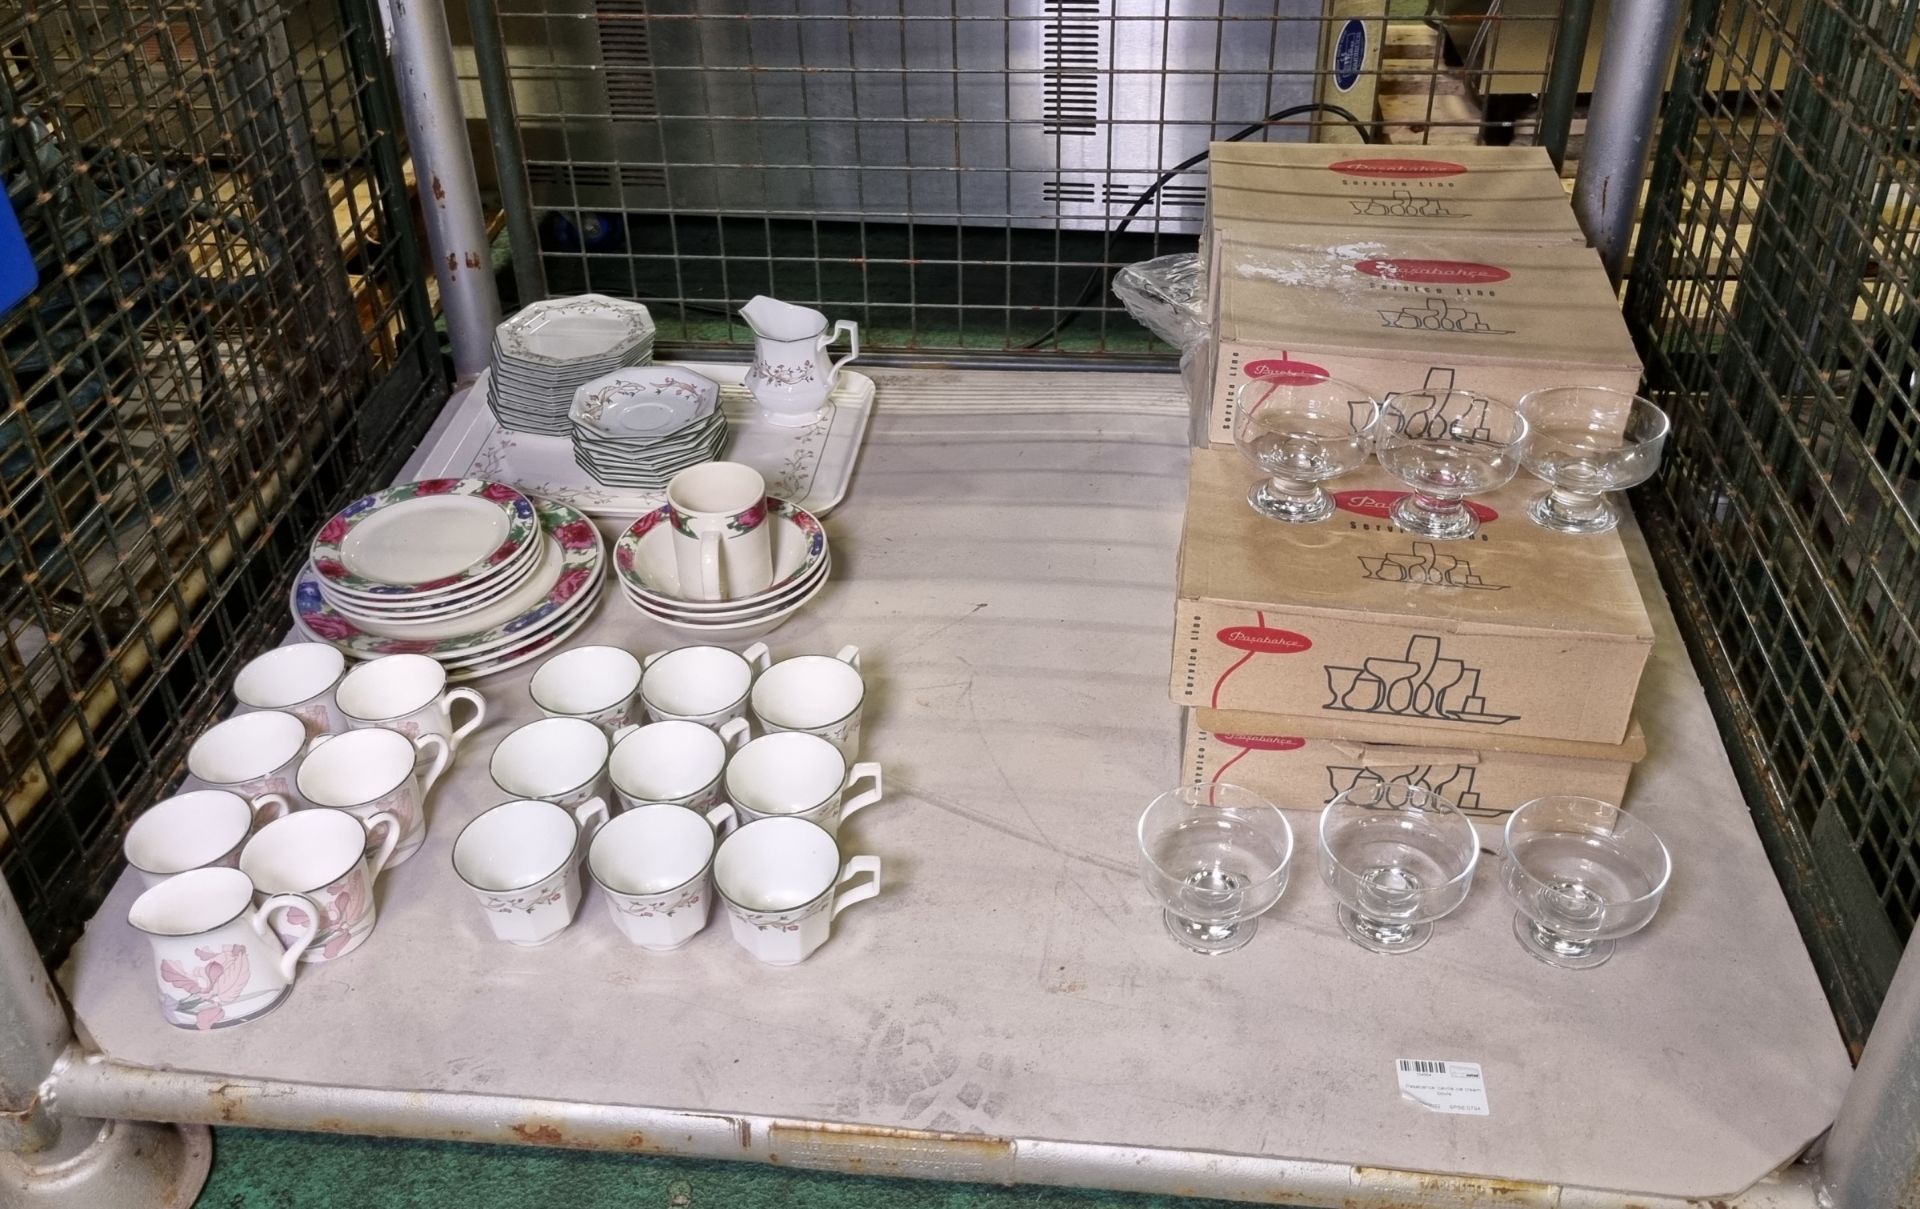 Decorative cups, saucers, plates and bowls, Pasabahce Iceville ice cream bowls